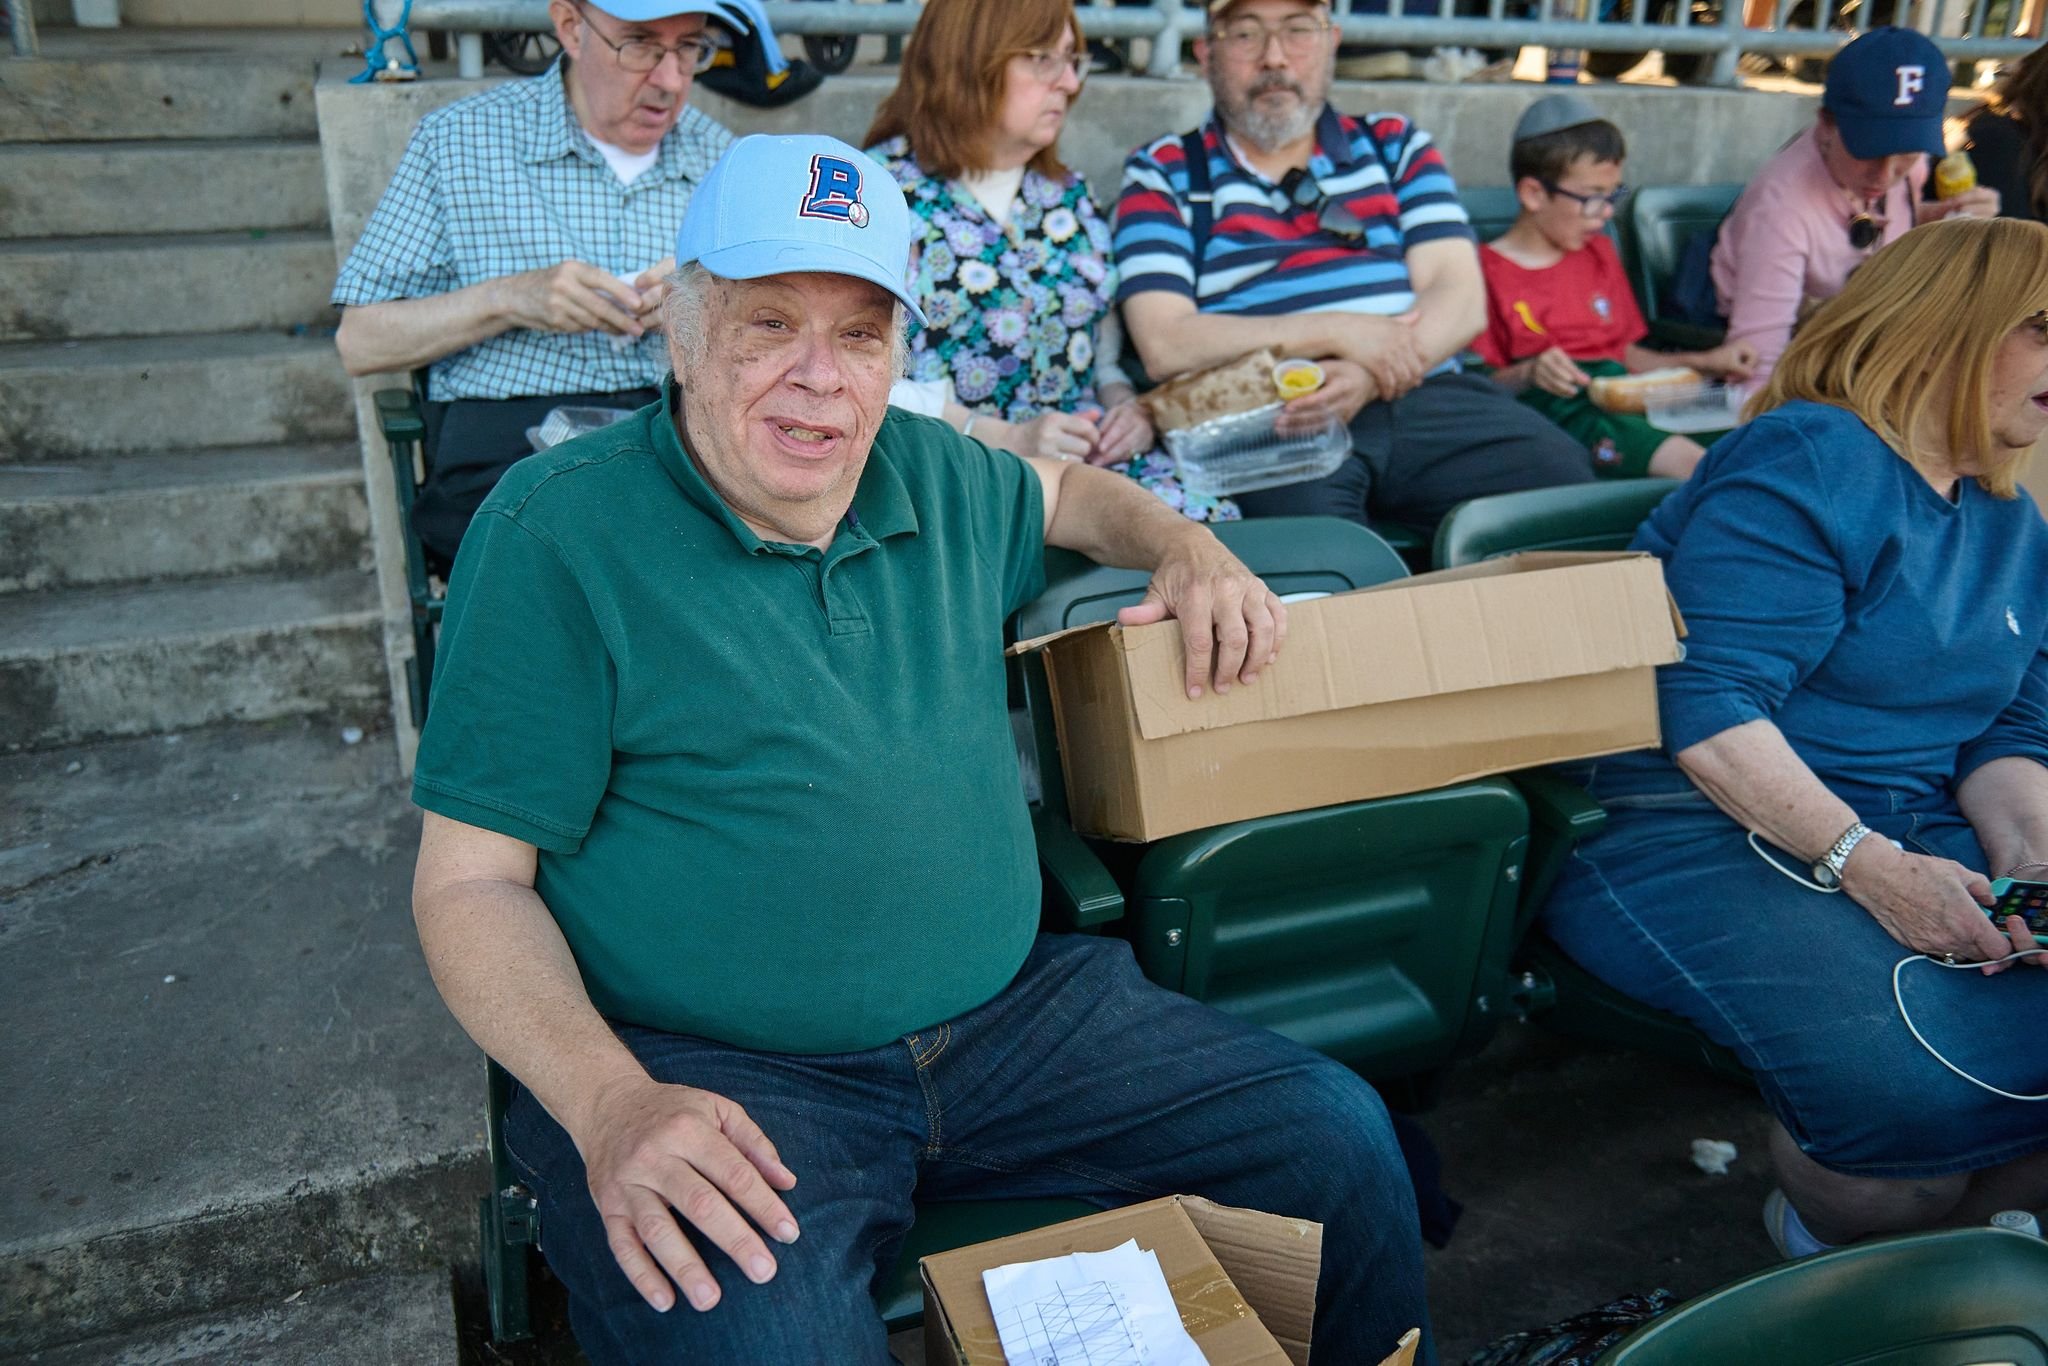 Mendy Aron attended the game between the New York Boulders and the Evansville Otters on Jewish Heritage Day with 76 others from Congregation Shomrei Torah, an Orthodox synagogue in Fair Lawn, N.J. July 30, 2023. Photo by Perry Bindelglass.